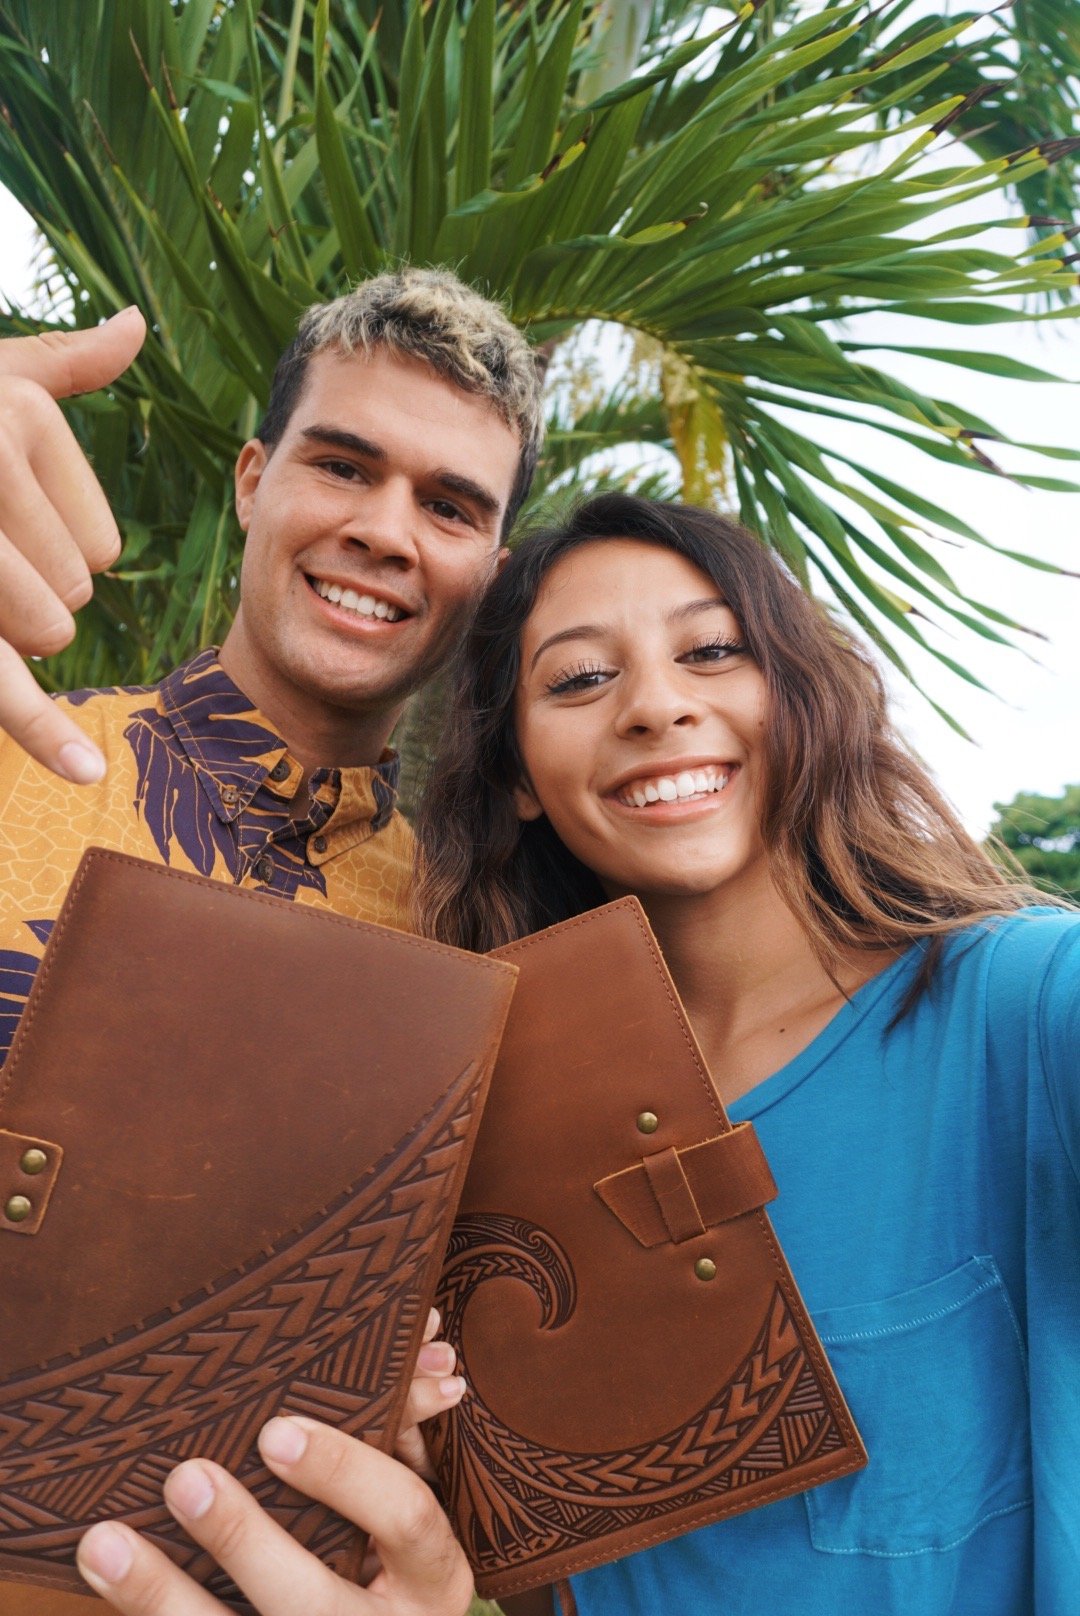 Young man and young woman holding leather journals